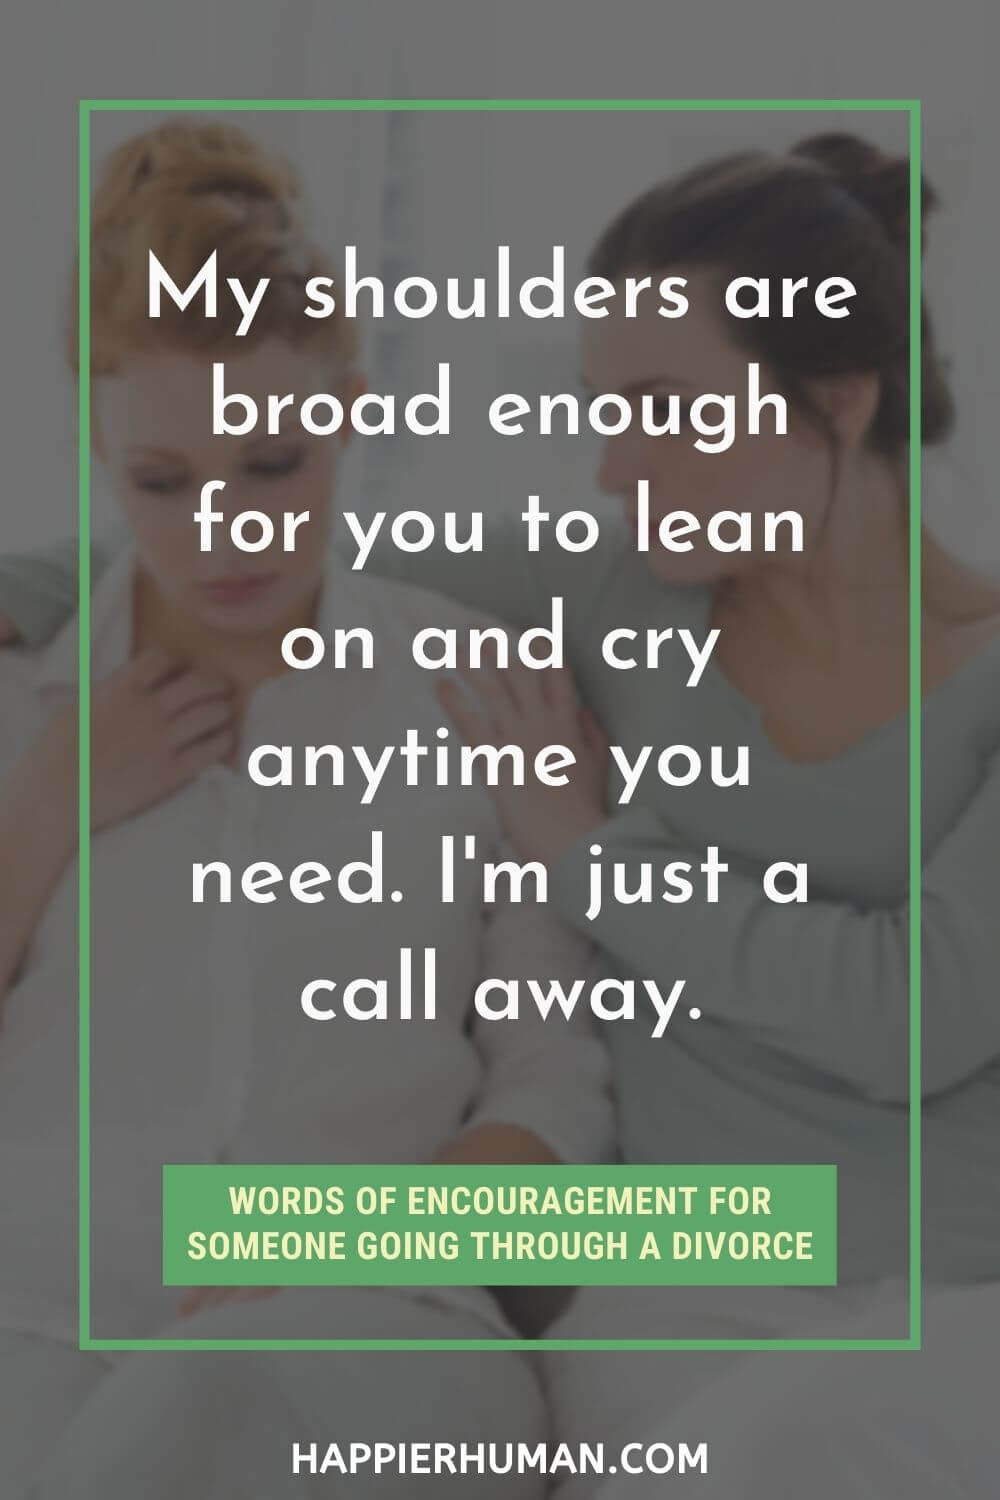 Words of Encouragement for someone going through a Divorce - My shoulders are broad enough for you to lean on and cry anytime you need. I'm just a call away. | what to say to a friend going through a divorce | how to help a male friend going through a divorce | what to say to a male friend going through a divorce